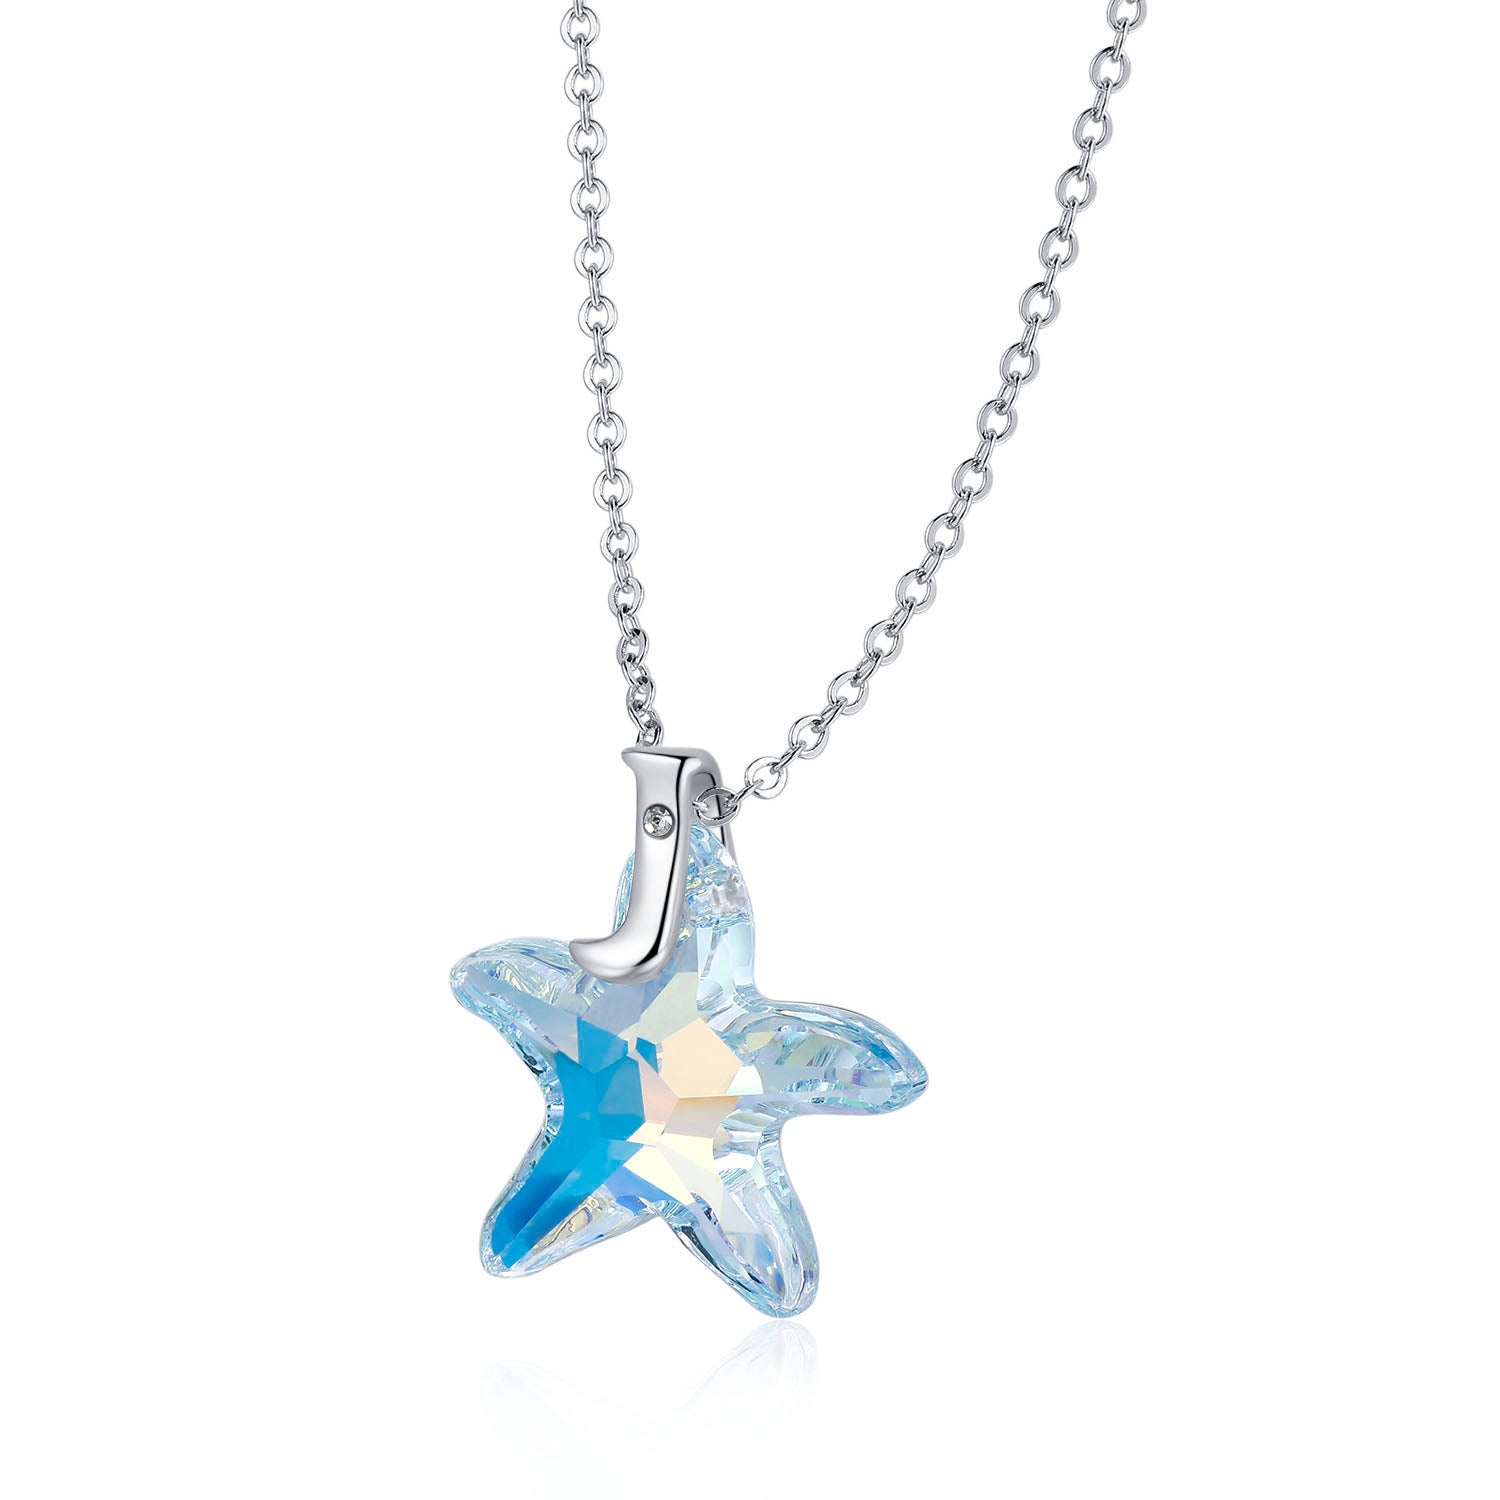 Planet J 925 Sterling Silver Ocean Star Pendant Necklace with Swarovski Elements Crystals